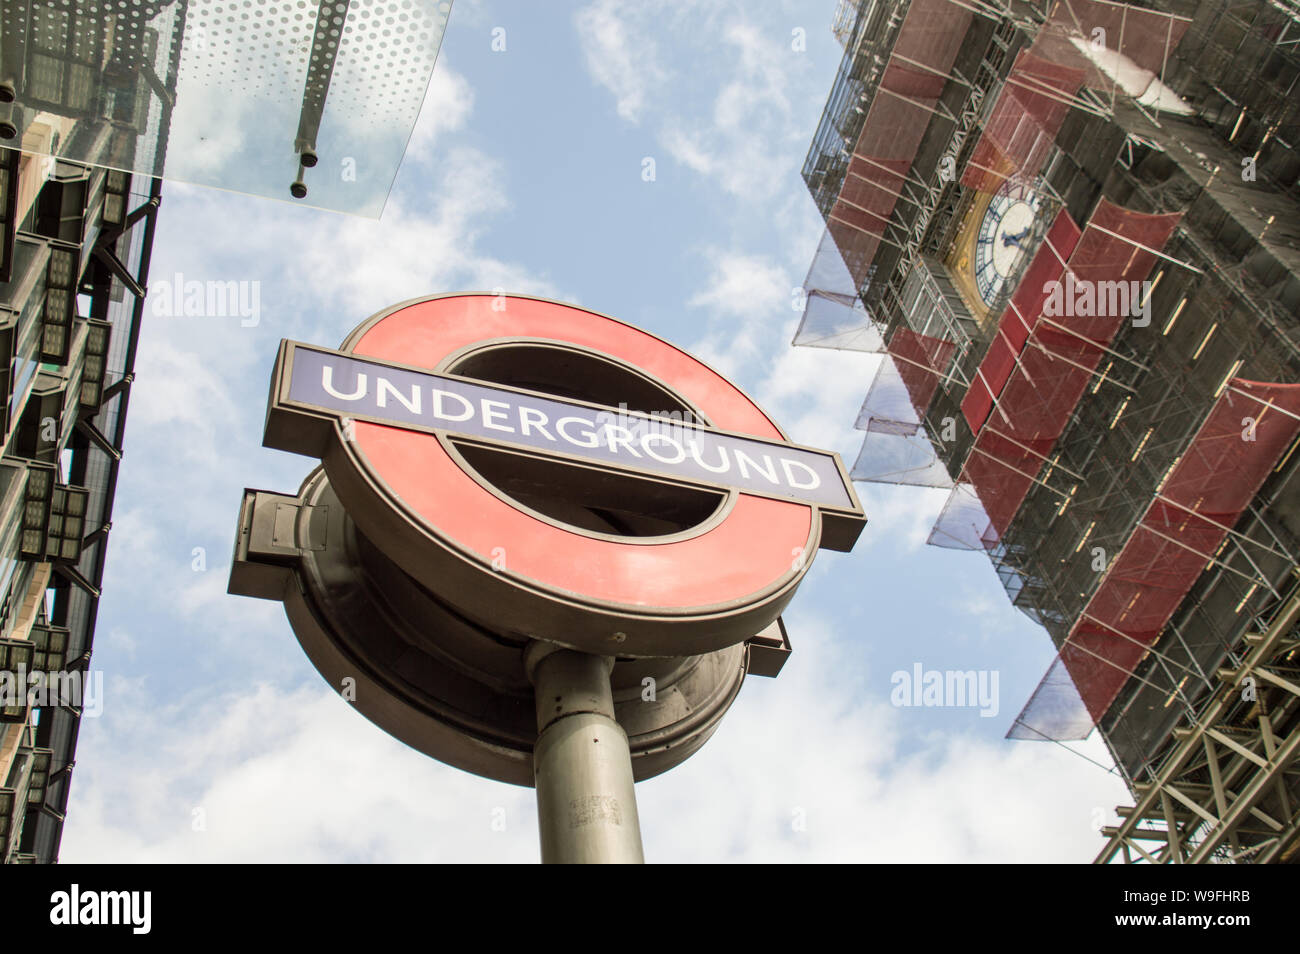 London Underground symbol outside Westminster station with a view of scaffolded Big Ben Stock Photo